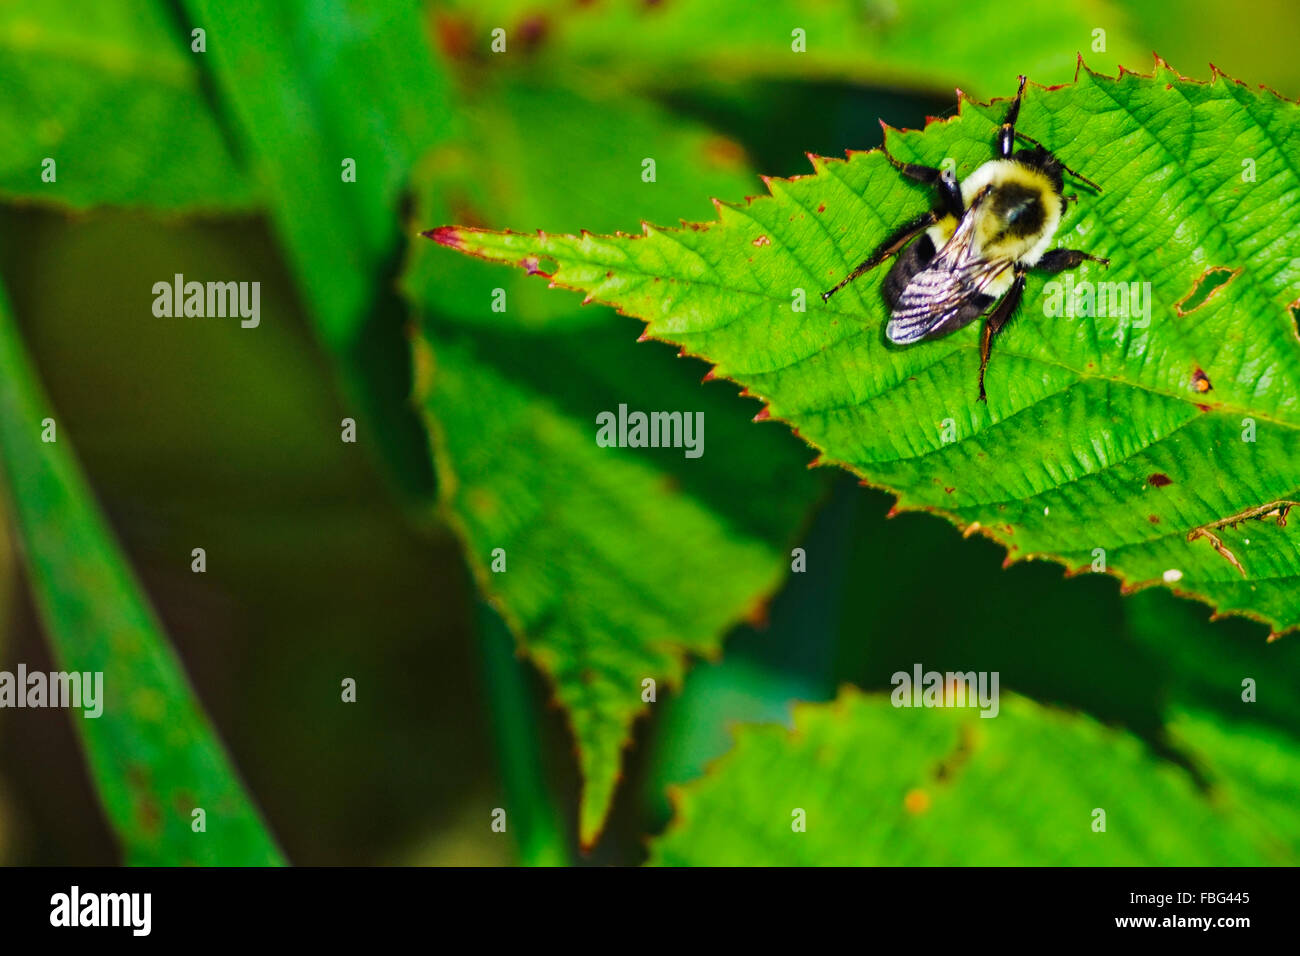 A black and yellow bee rests on a green leaf. Stock Photo